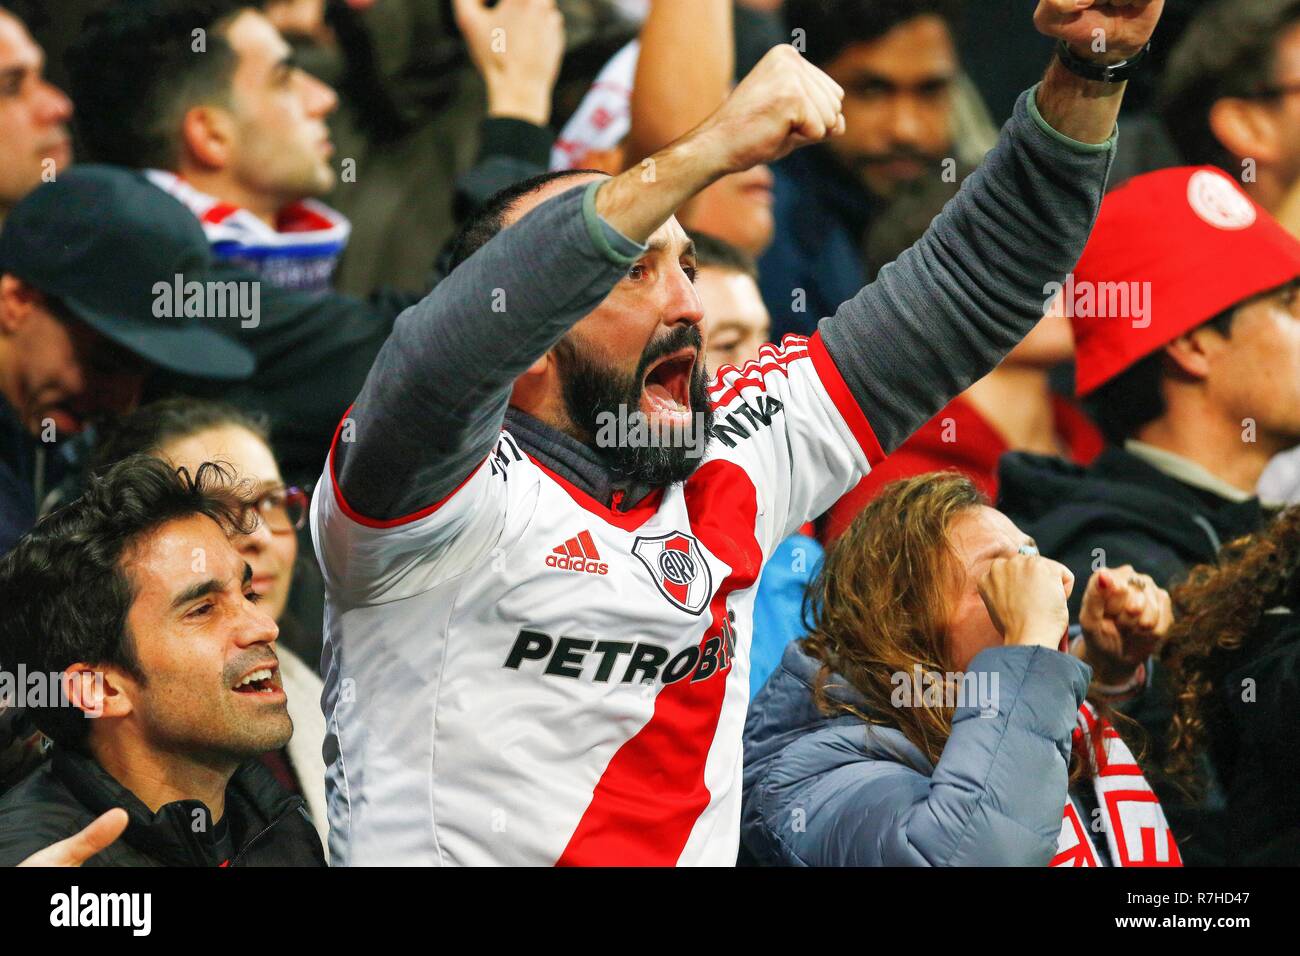 Madrid, Spain. 9th Dec, 2018. Fan of River Plate celebrating a goal during the second leg match between River Plate and Boca Juniors as part of the Finals of Copa CONMEBOL Libertadores 2018 at Estadio Santiago Bernabeu in Madrid.River Plate won the title of Copa Libertadores 2018 by beating Boca Juniors. Credit: Manu Reino/SOPA Images/ZUMA Wire/Alamy Live News Stock Photo